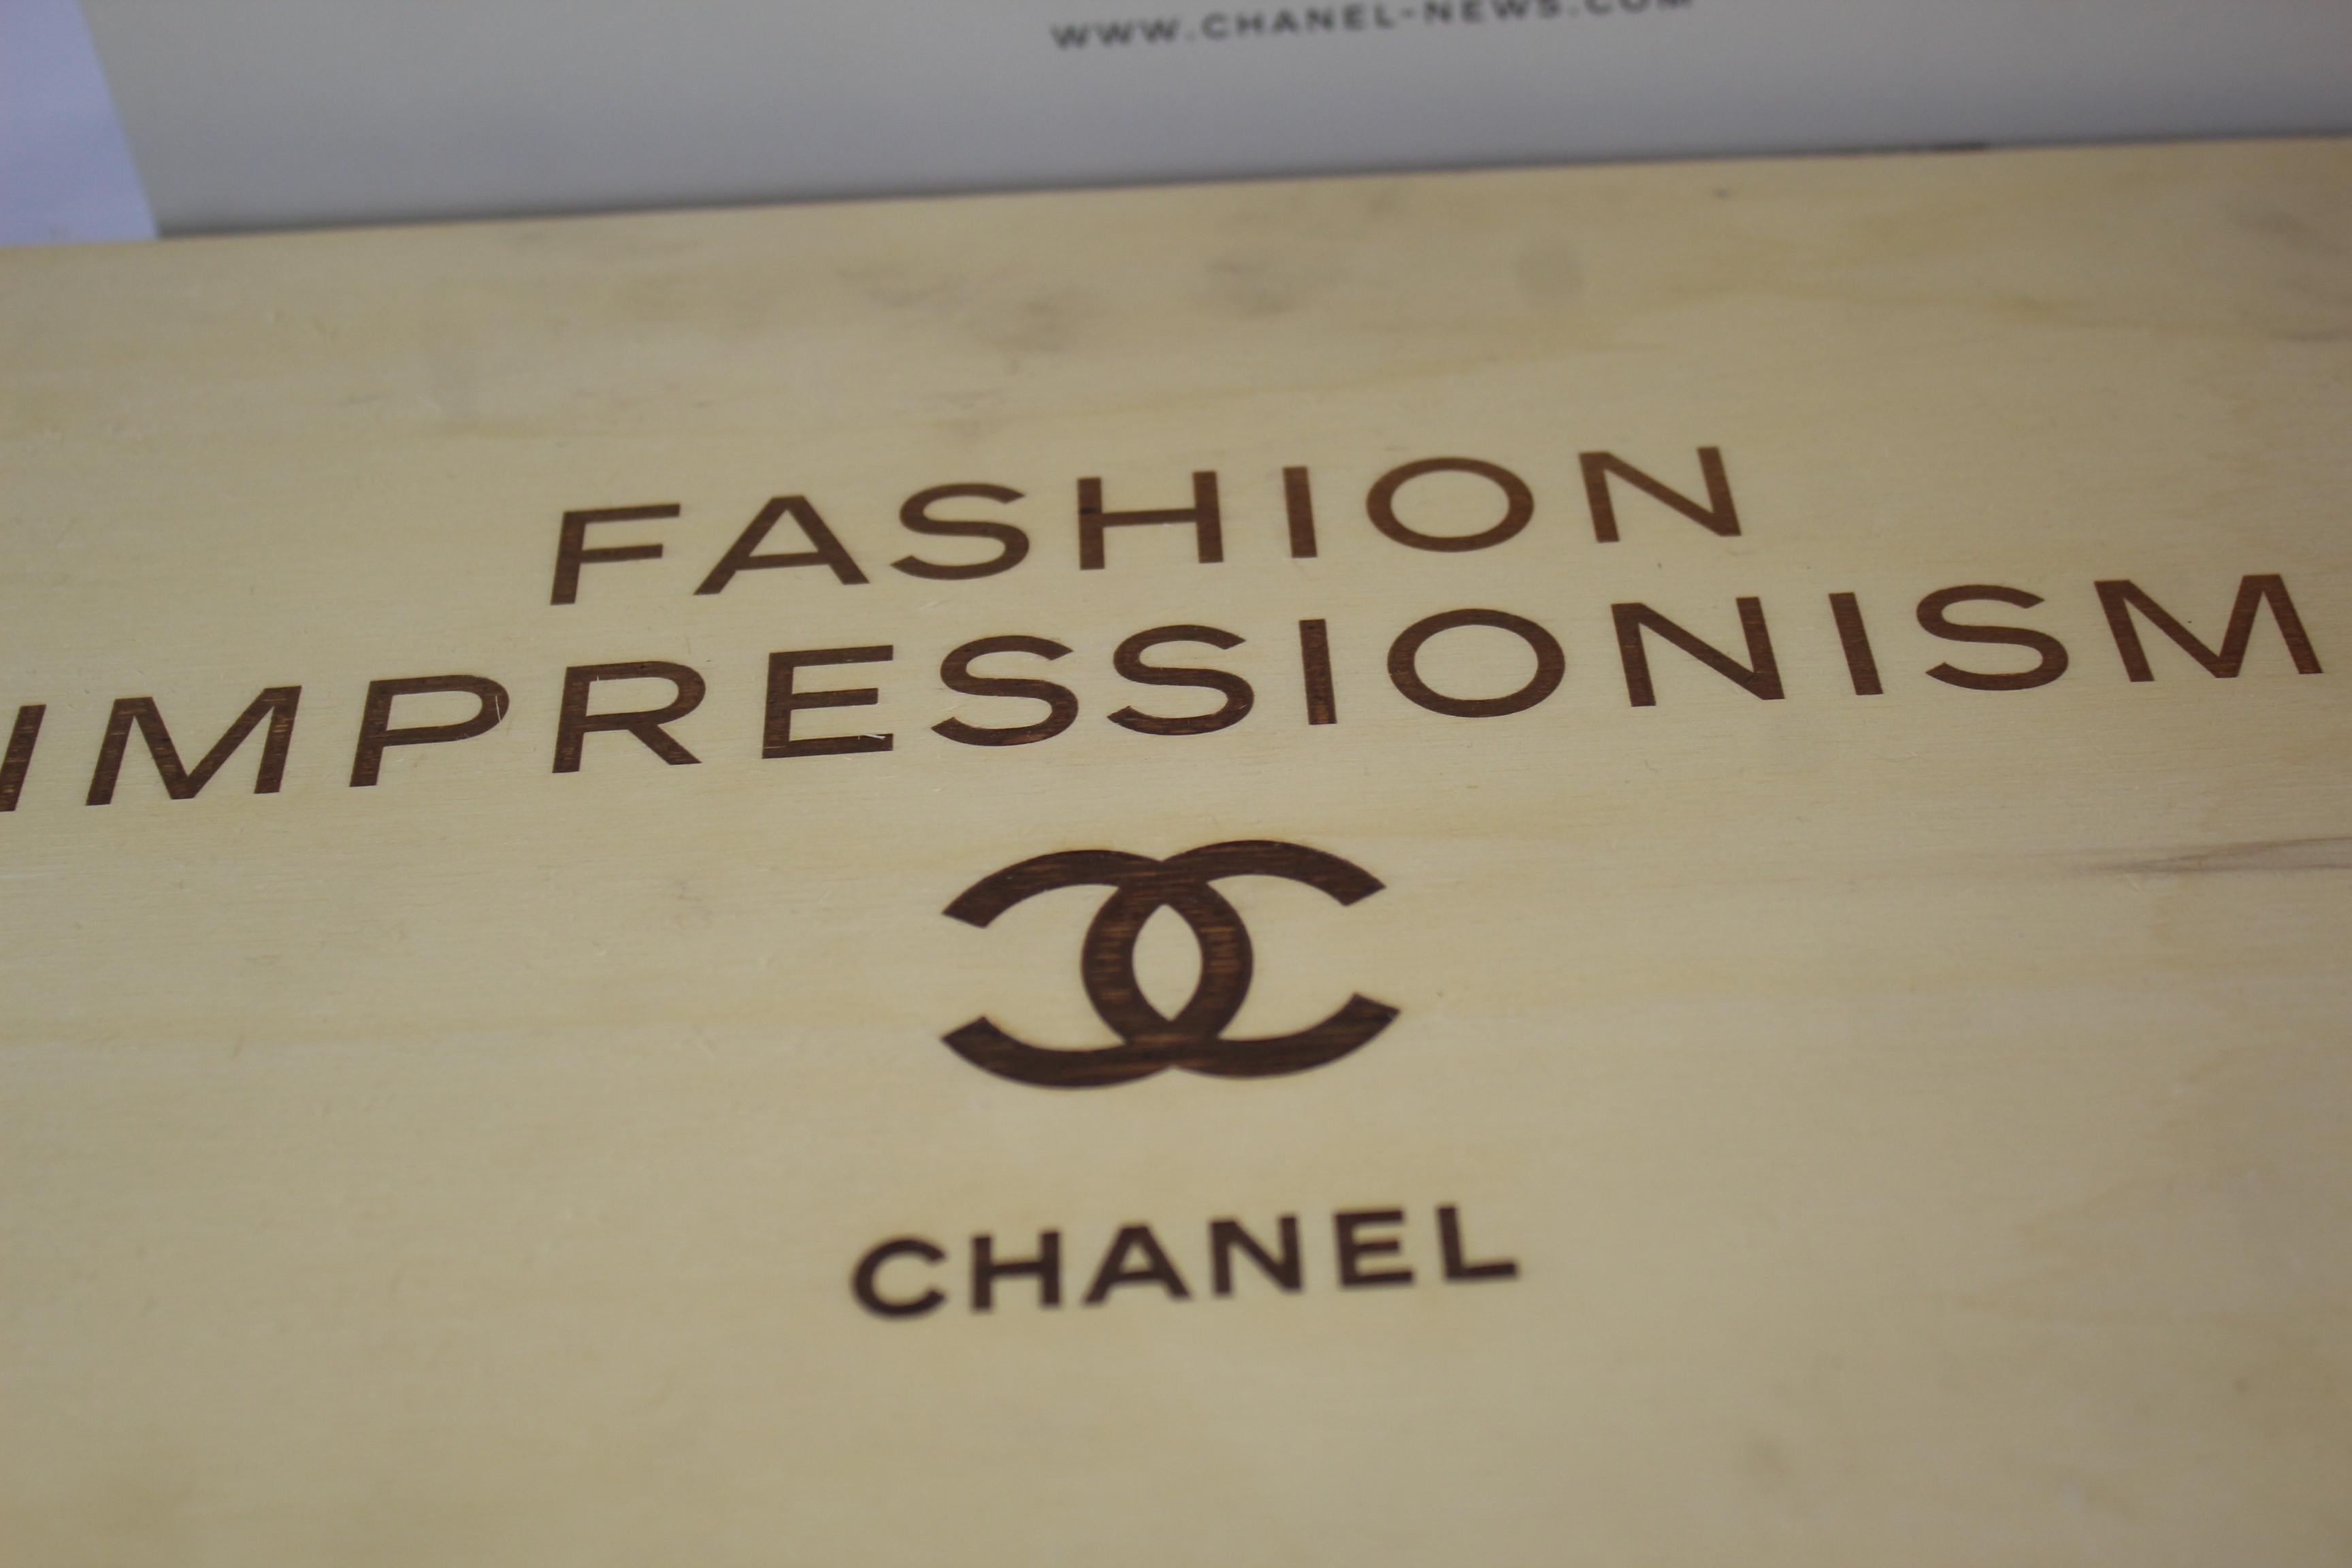 Women's or Men's Chanel Wood Fashion Impressionism Bag / Case. Kit 2015 Cruise Collection